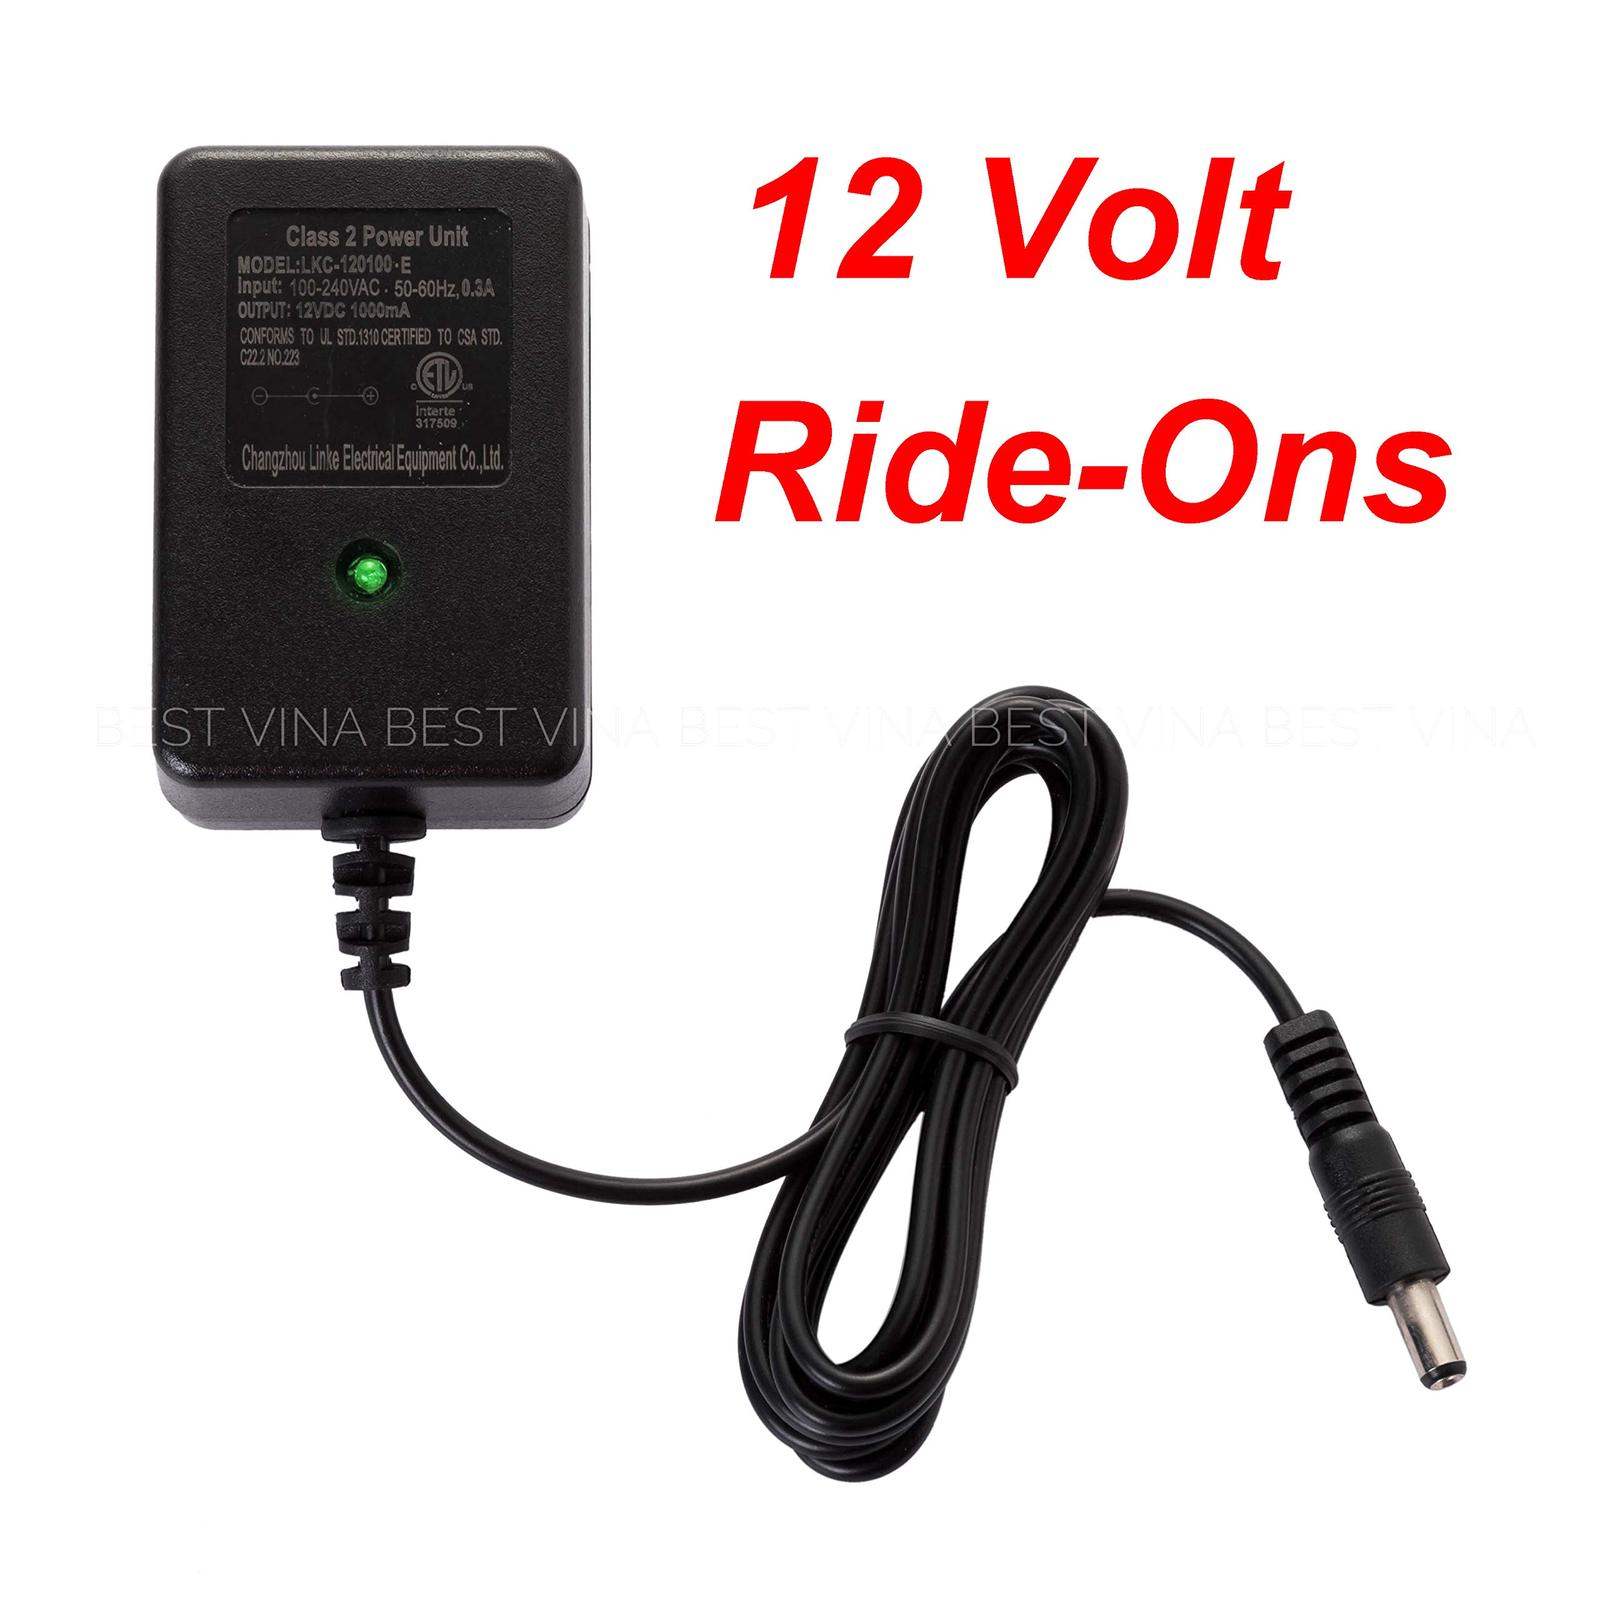 12 volt battery charger for ride on toys